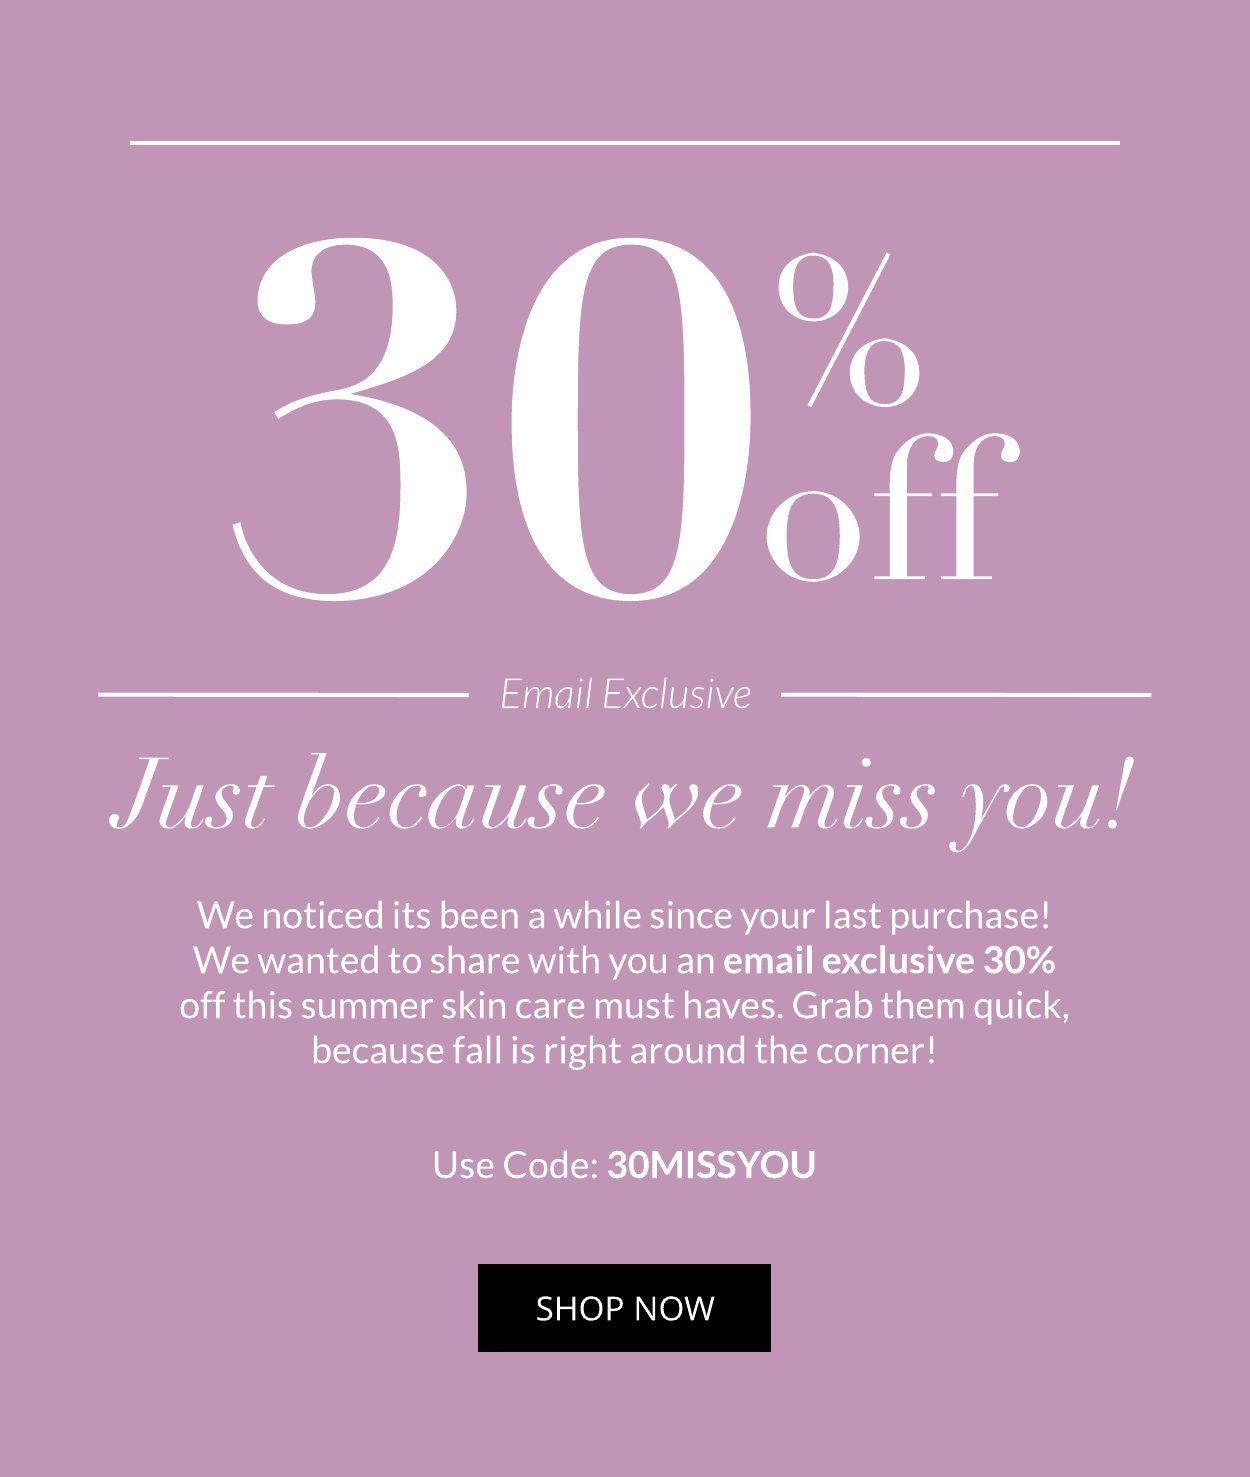 30% off email exclusive